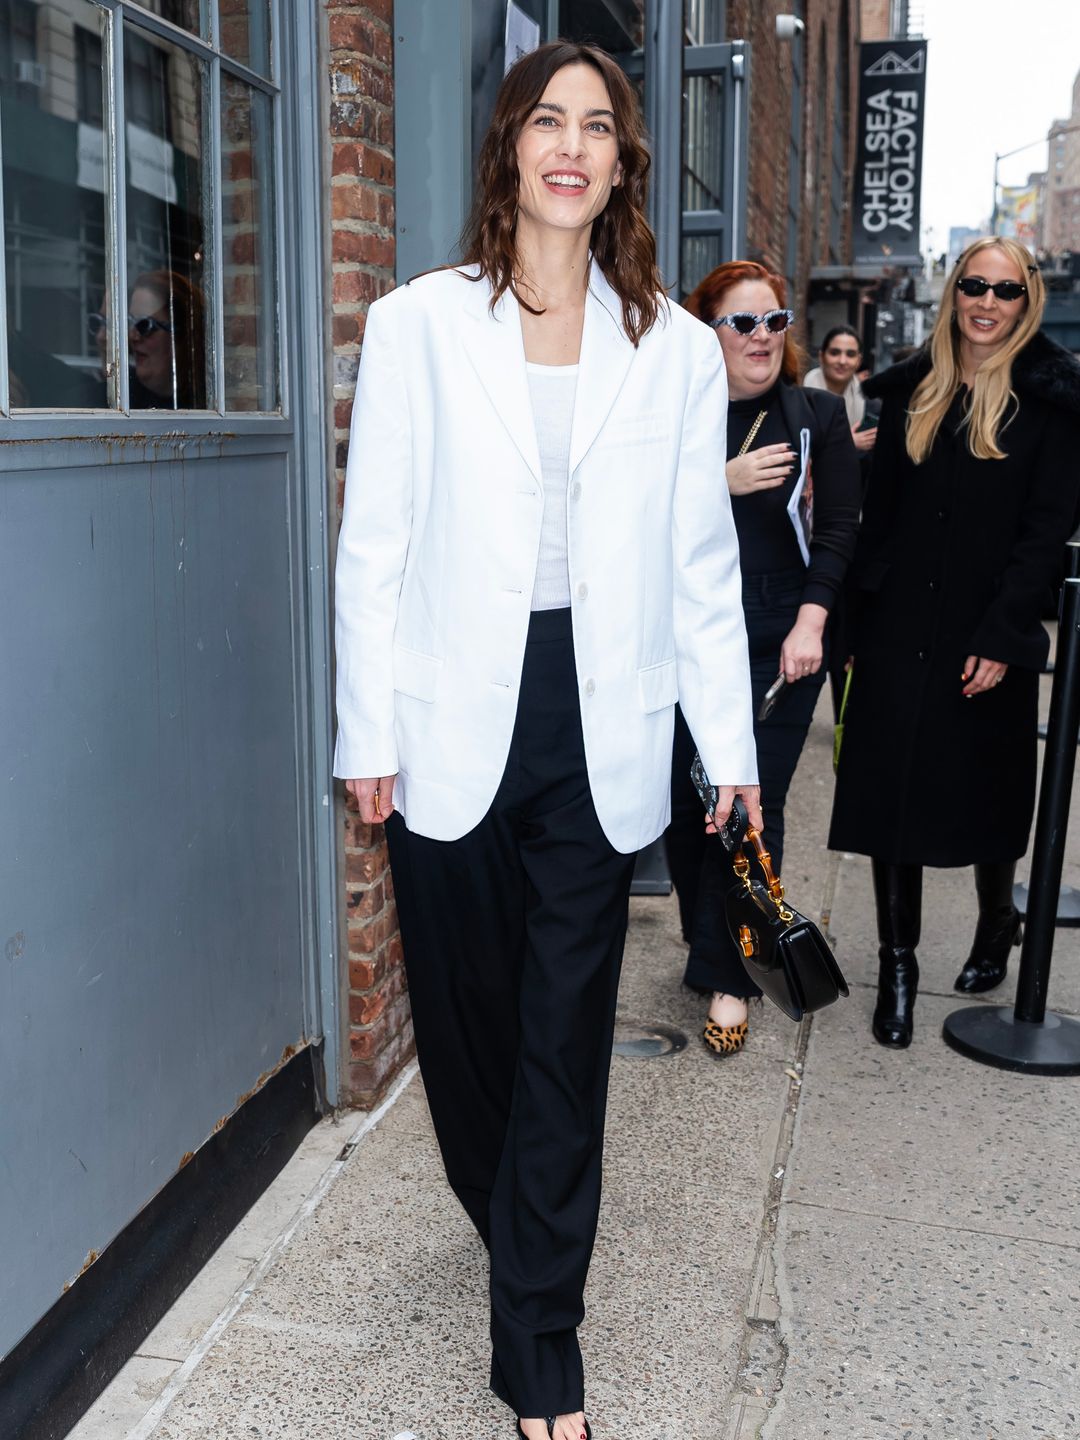 Alexa Chung kept things casual for the Proenza Schouler fashion show in a white blazer and black trouser ensemble.